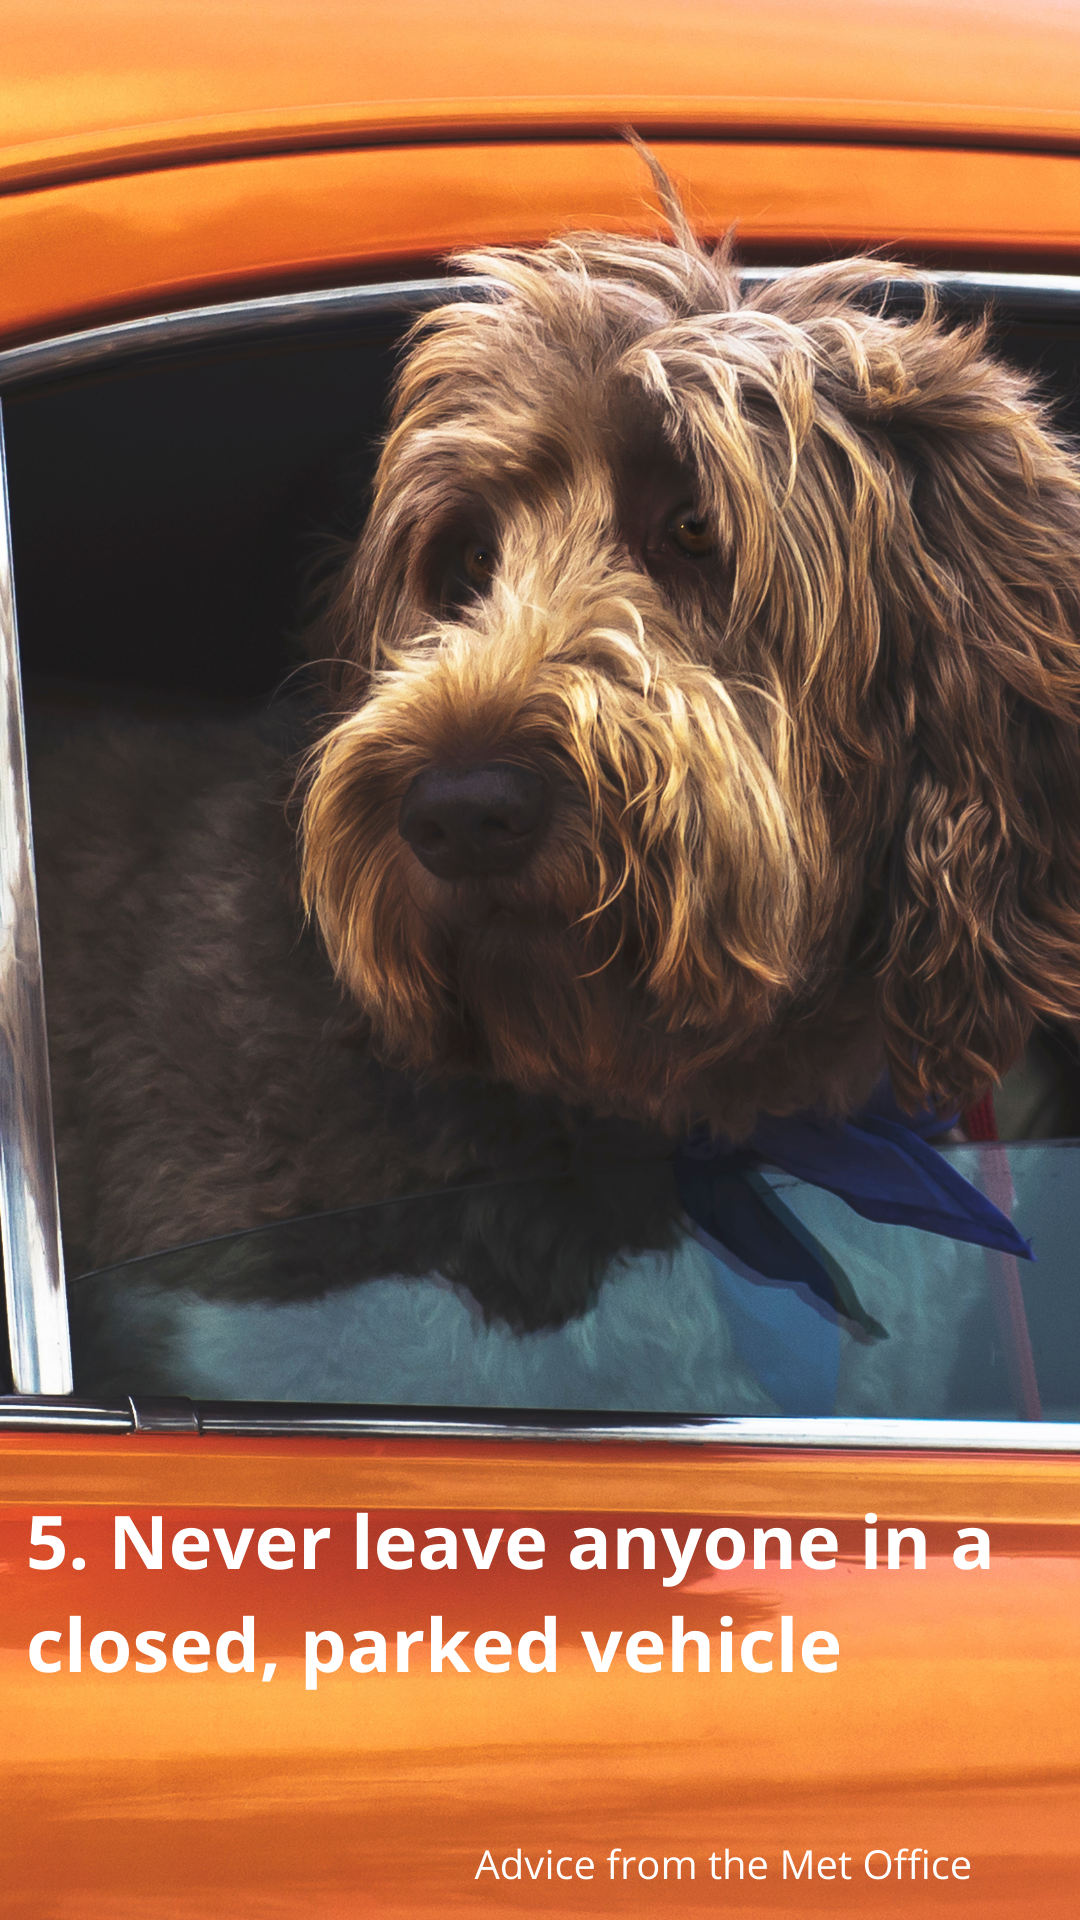 5. Never leave anyone in a closed, parked vehicle (photo of dog in car)